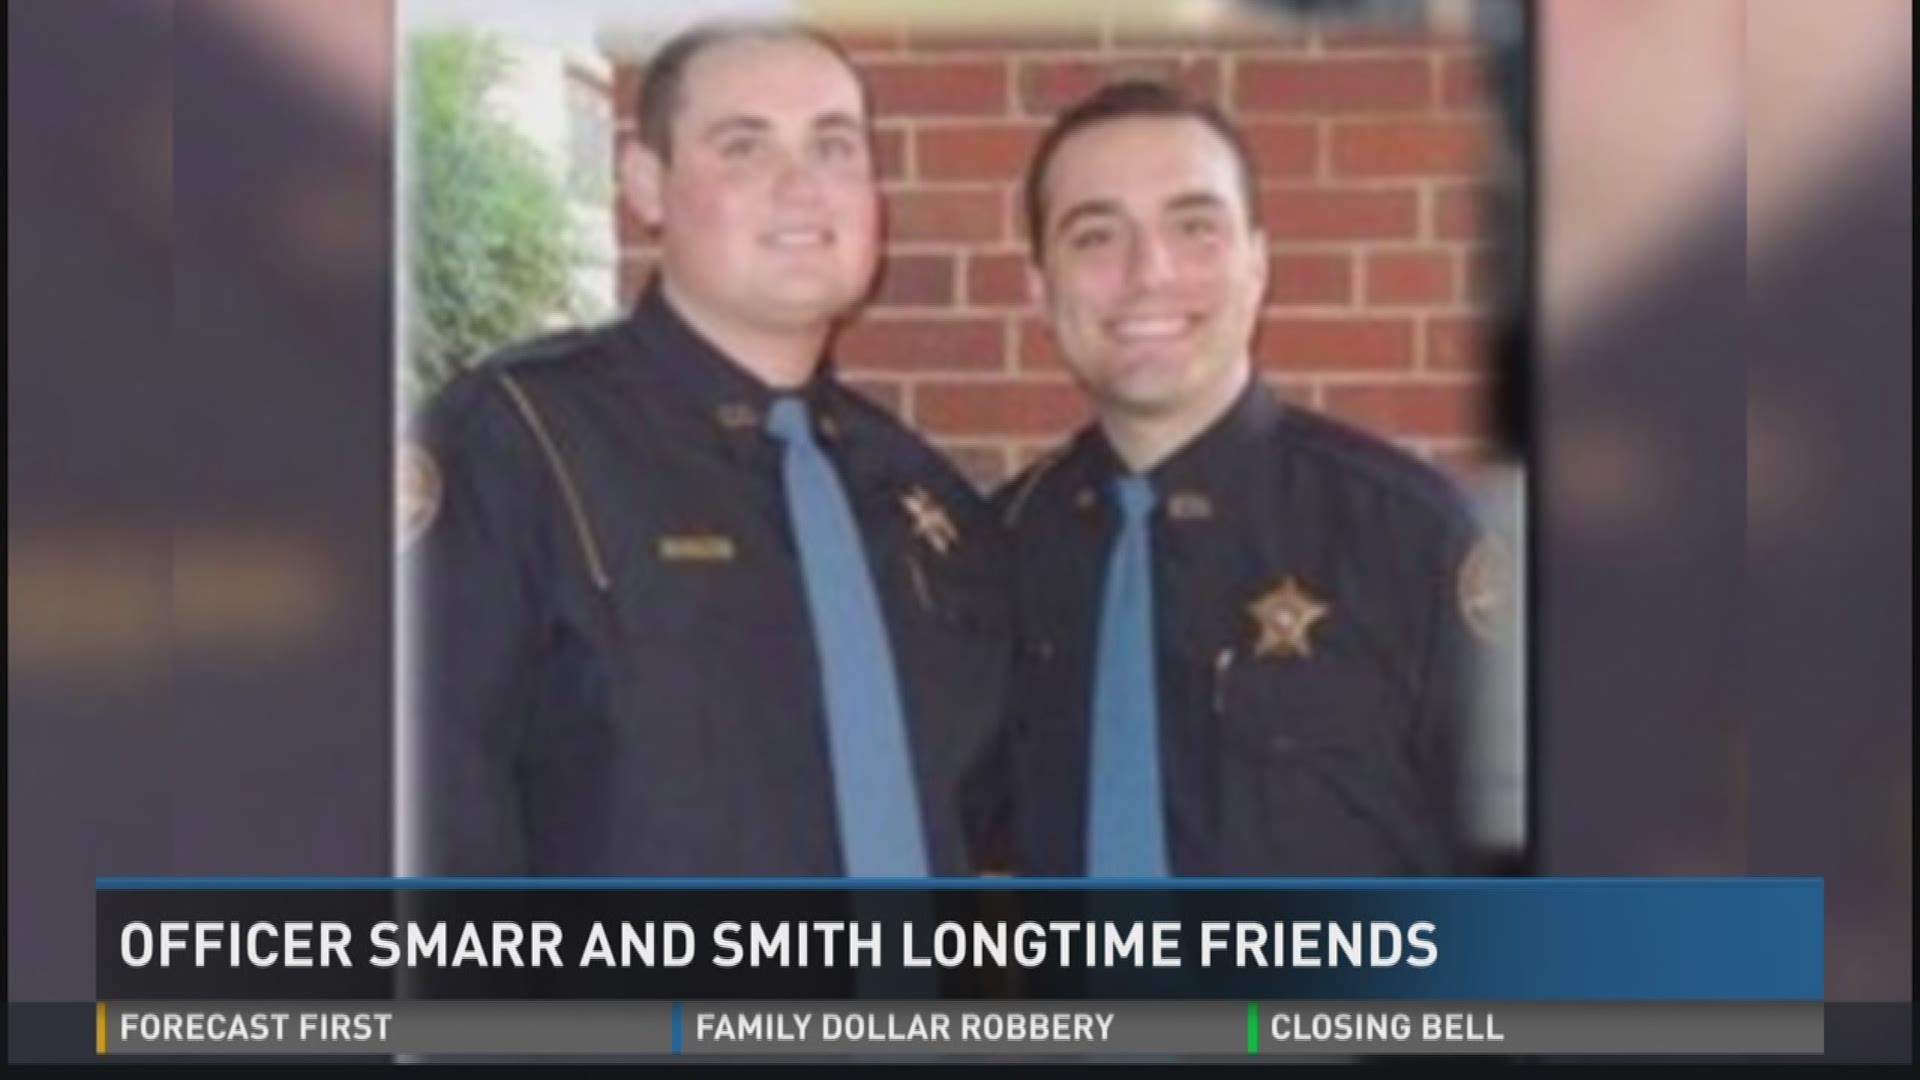 Officers Smarr, Smith longtime friends